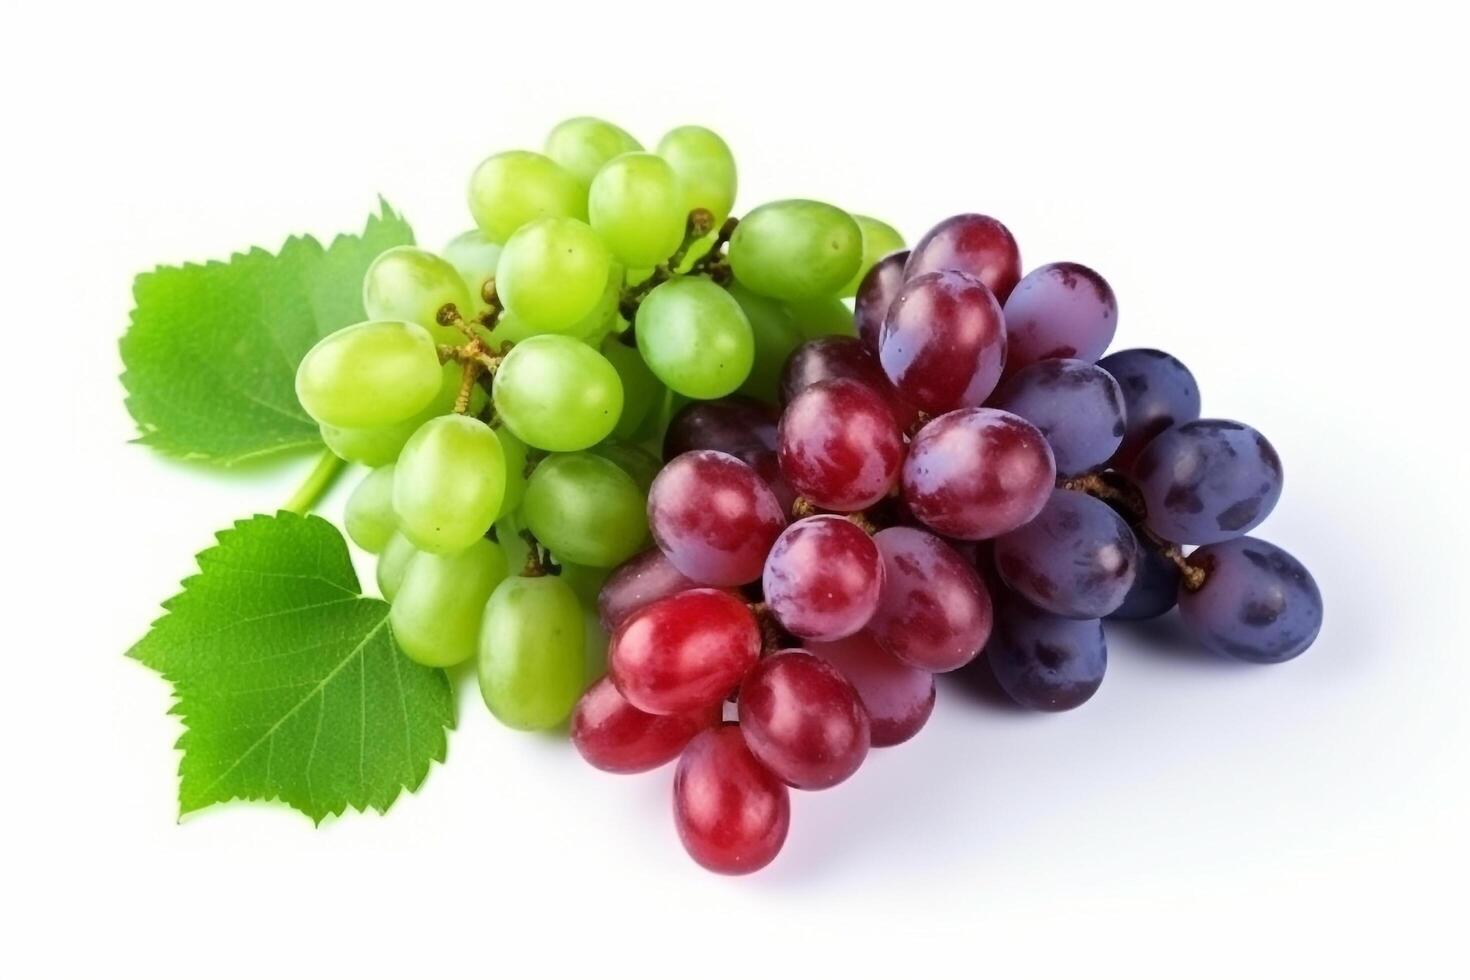 Mix of grapes with leaves isolated on the white background.. photo